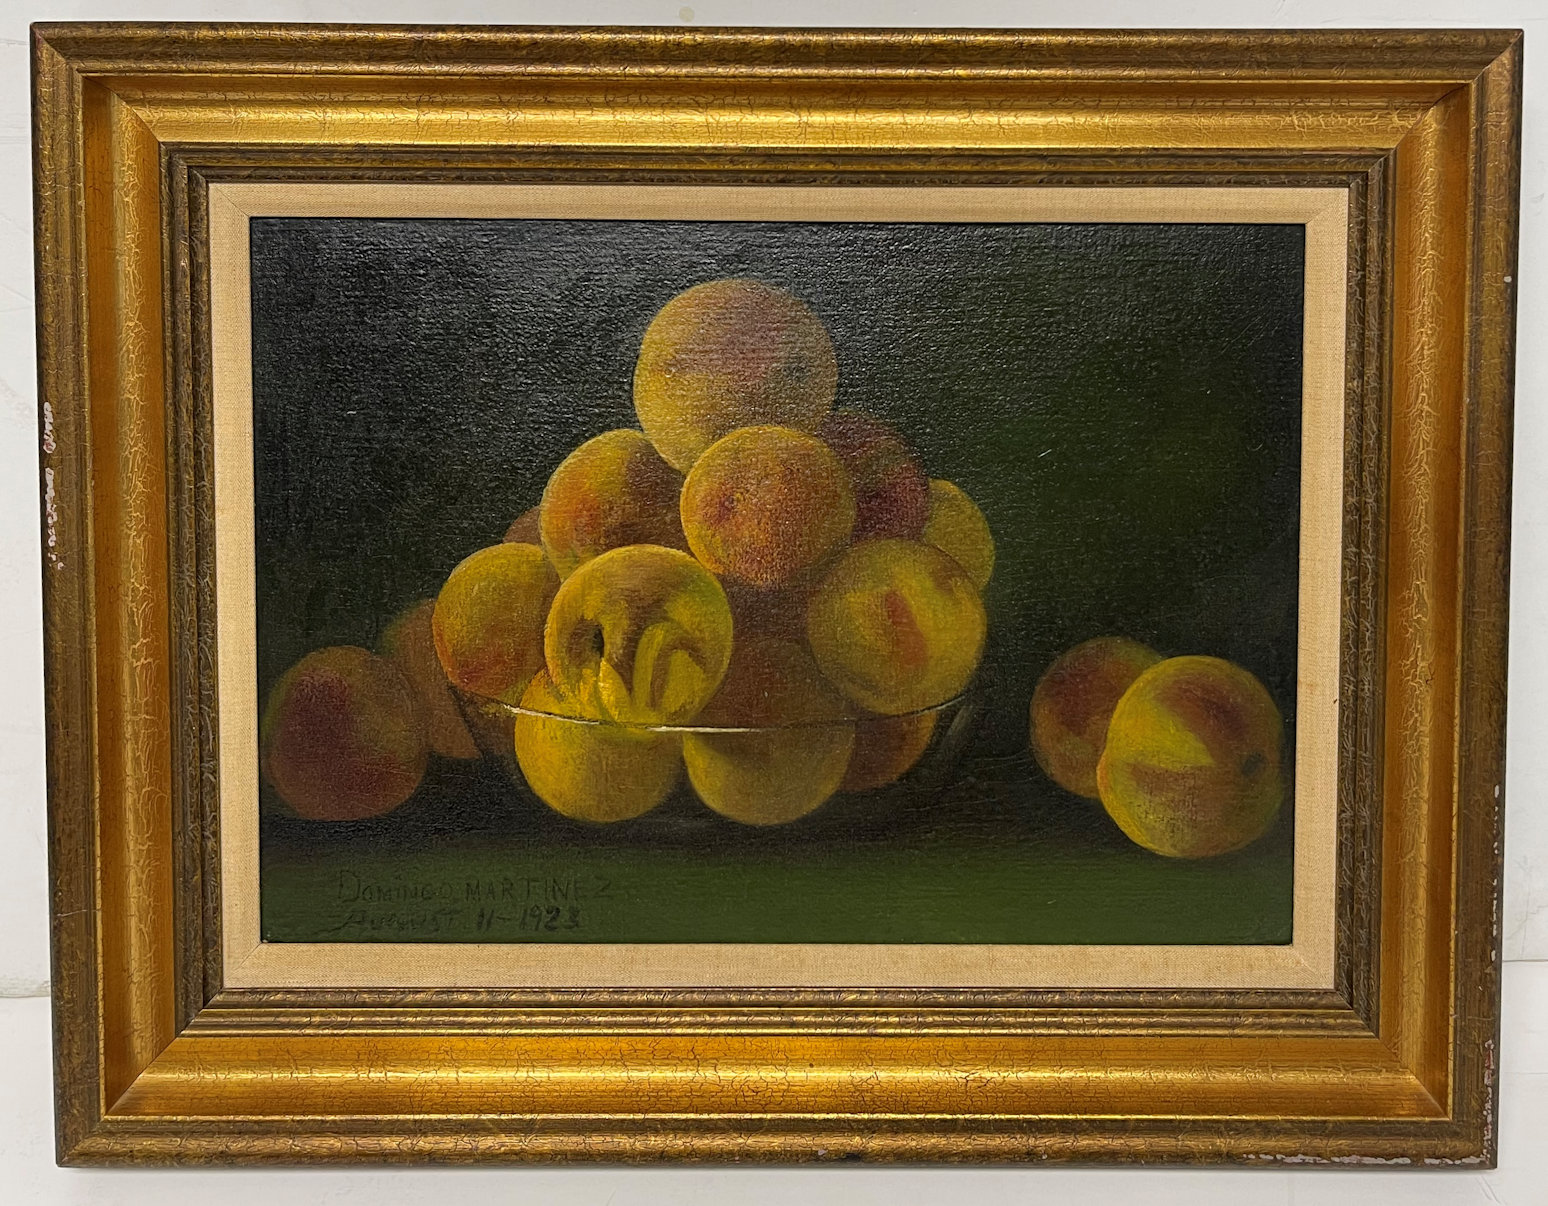 BOWL OF PEACHES PAINTING BY DOMINGO 27597a